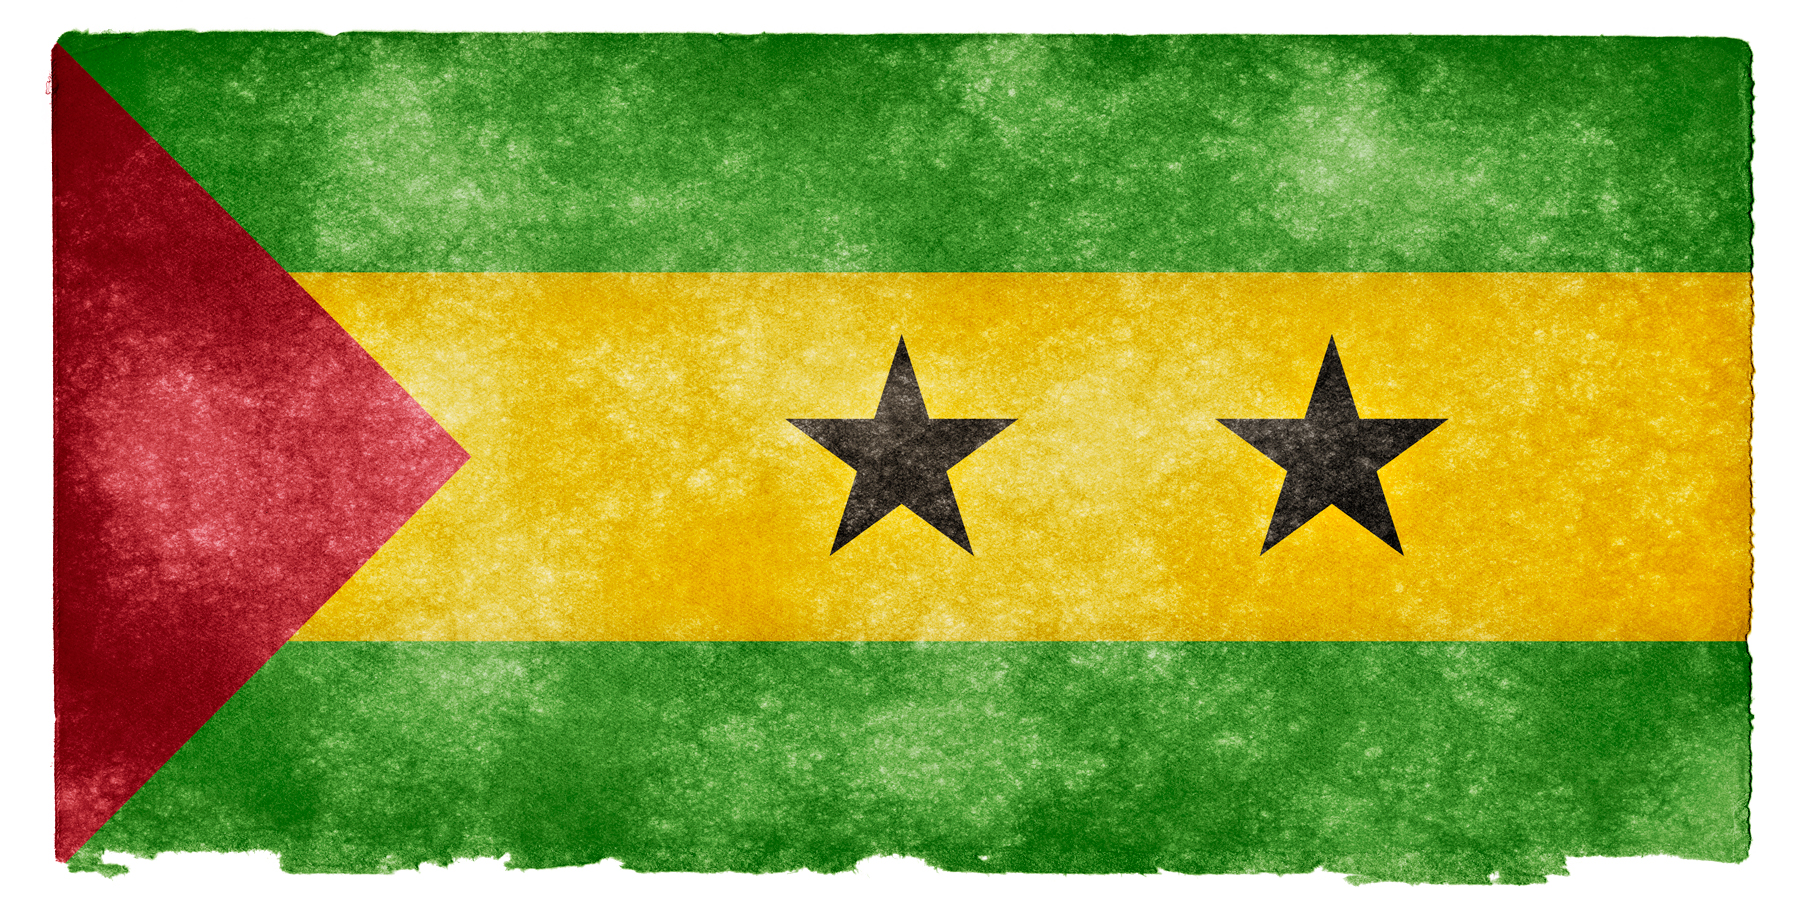 Sao Tome and Principe Grunge Flag, Africa, Sheet, Page, Paper, HQ Photo